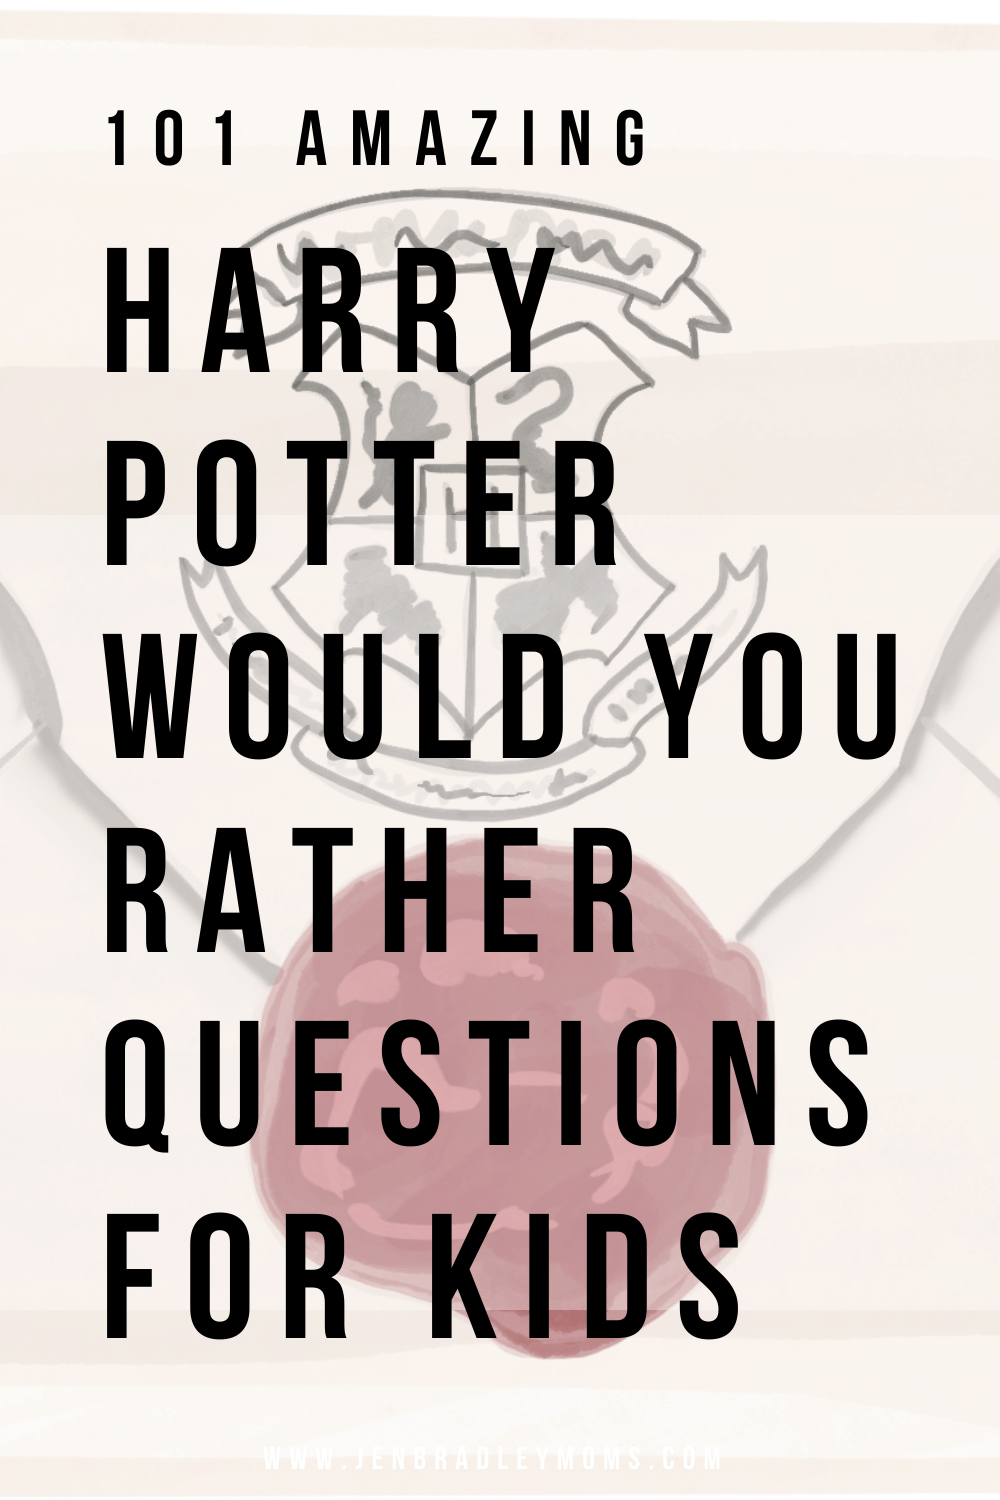 101 Amazing Harry Potter Would You Rather Questions for Kids